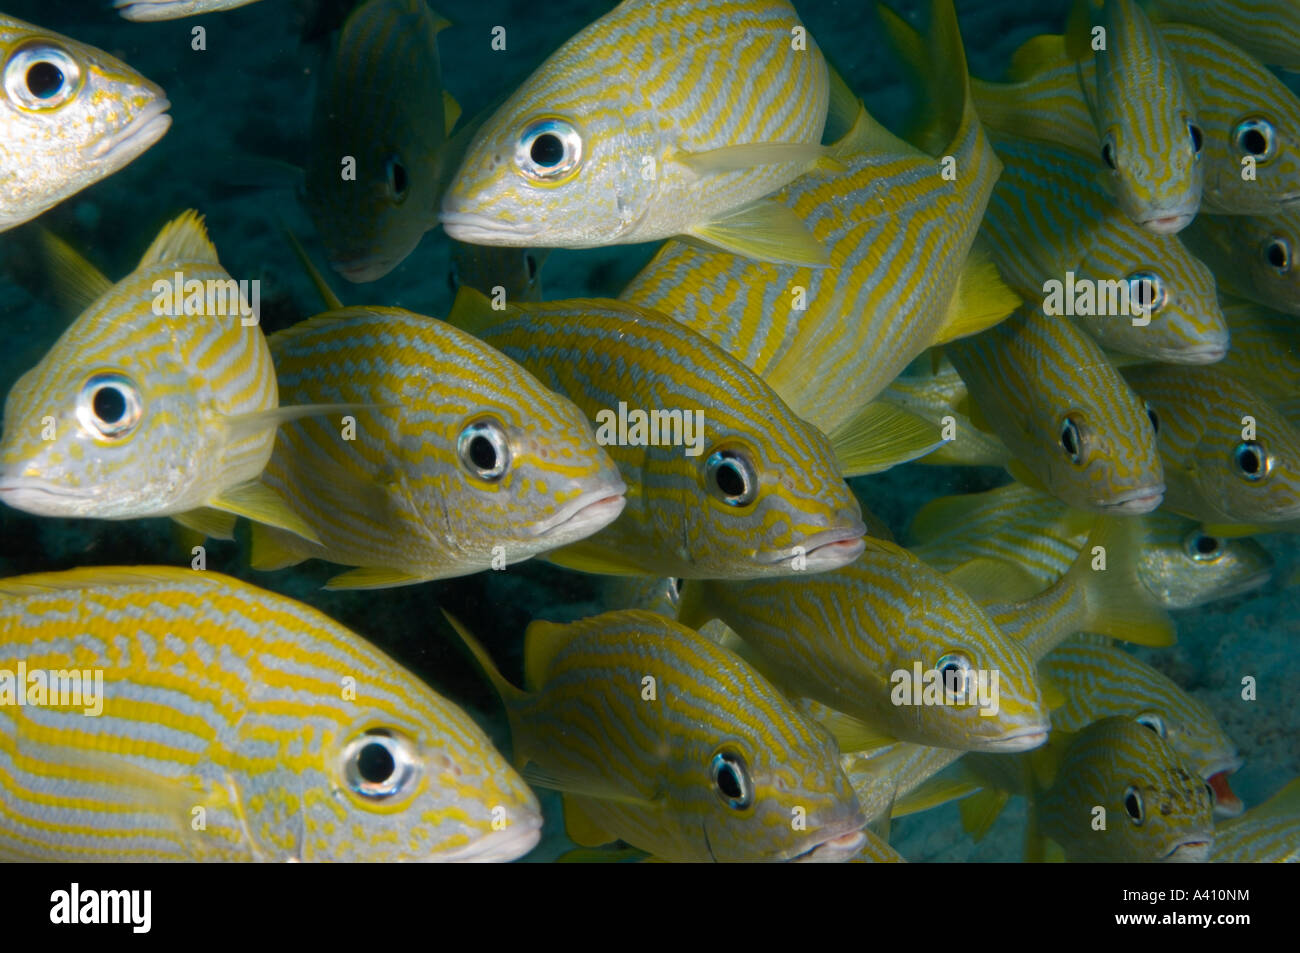 School of juvenile french grunts underwater at Bonaire Island in the Caribbean Stock Photo